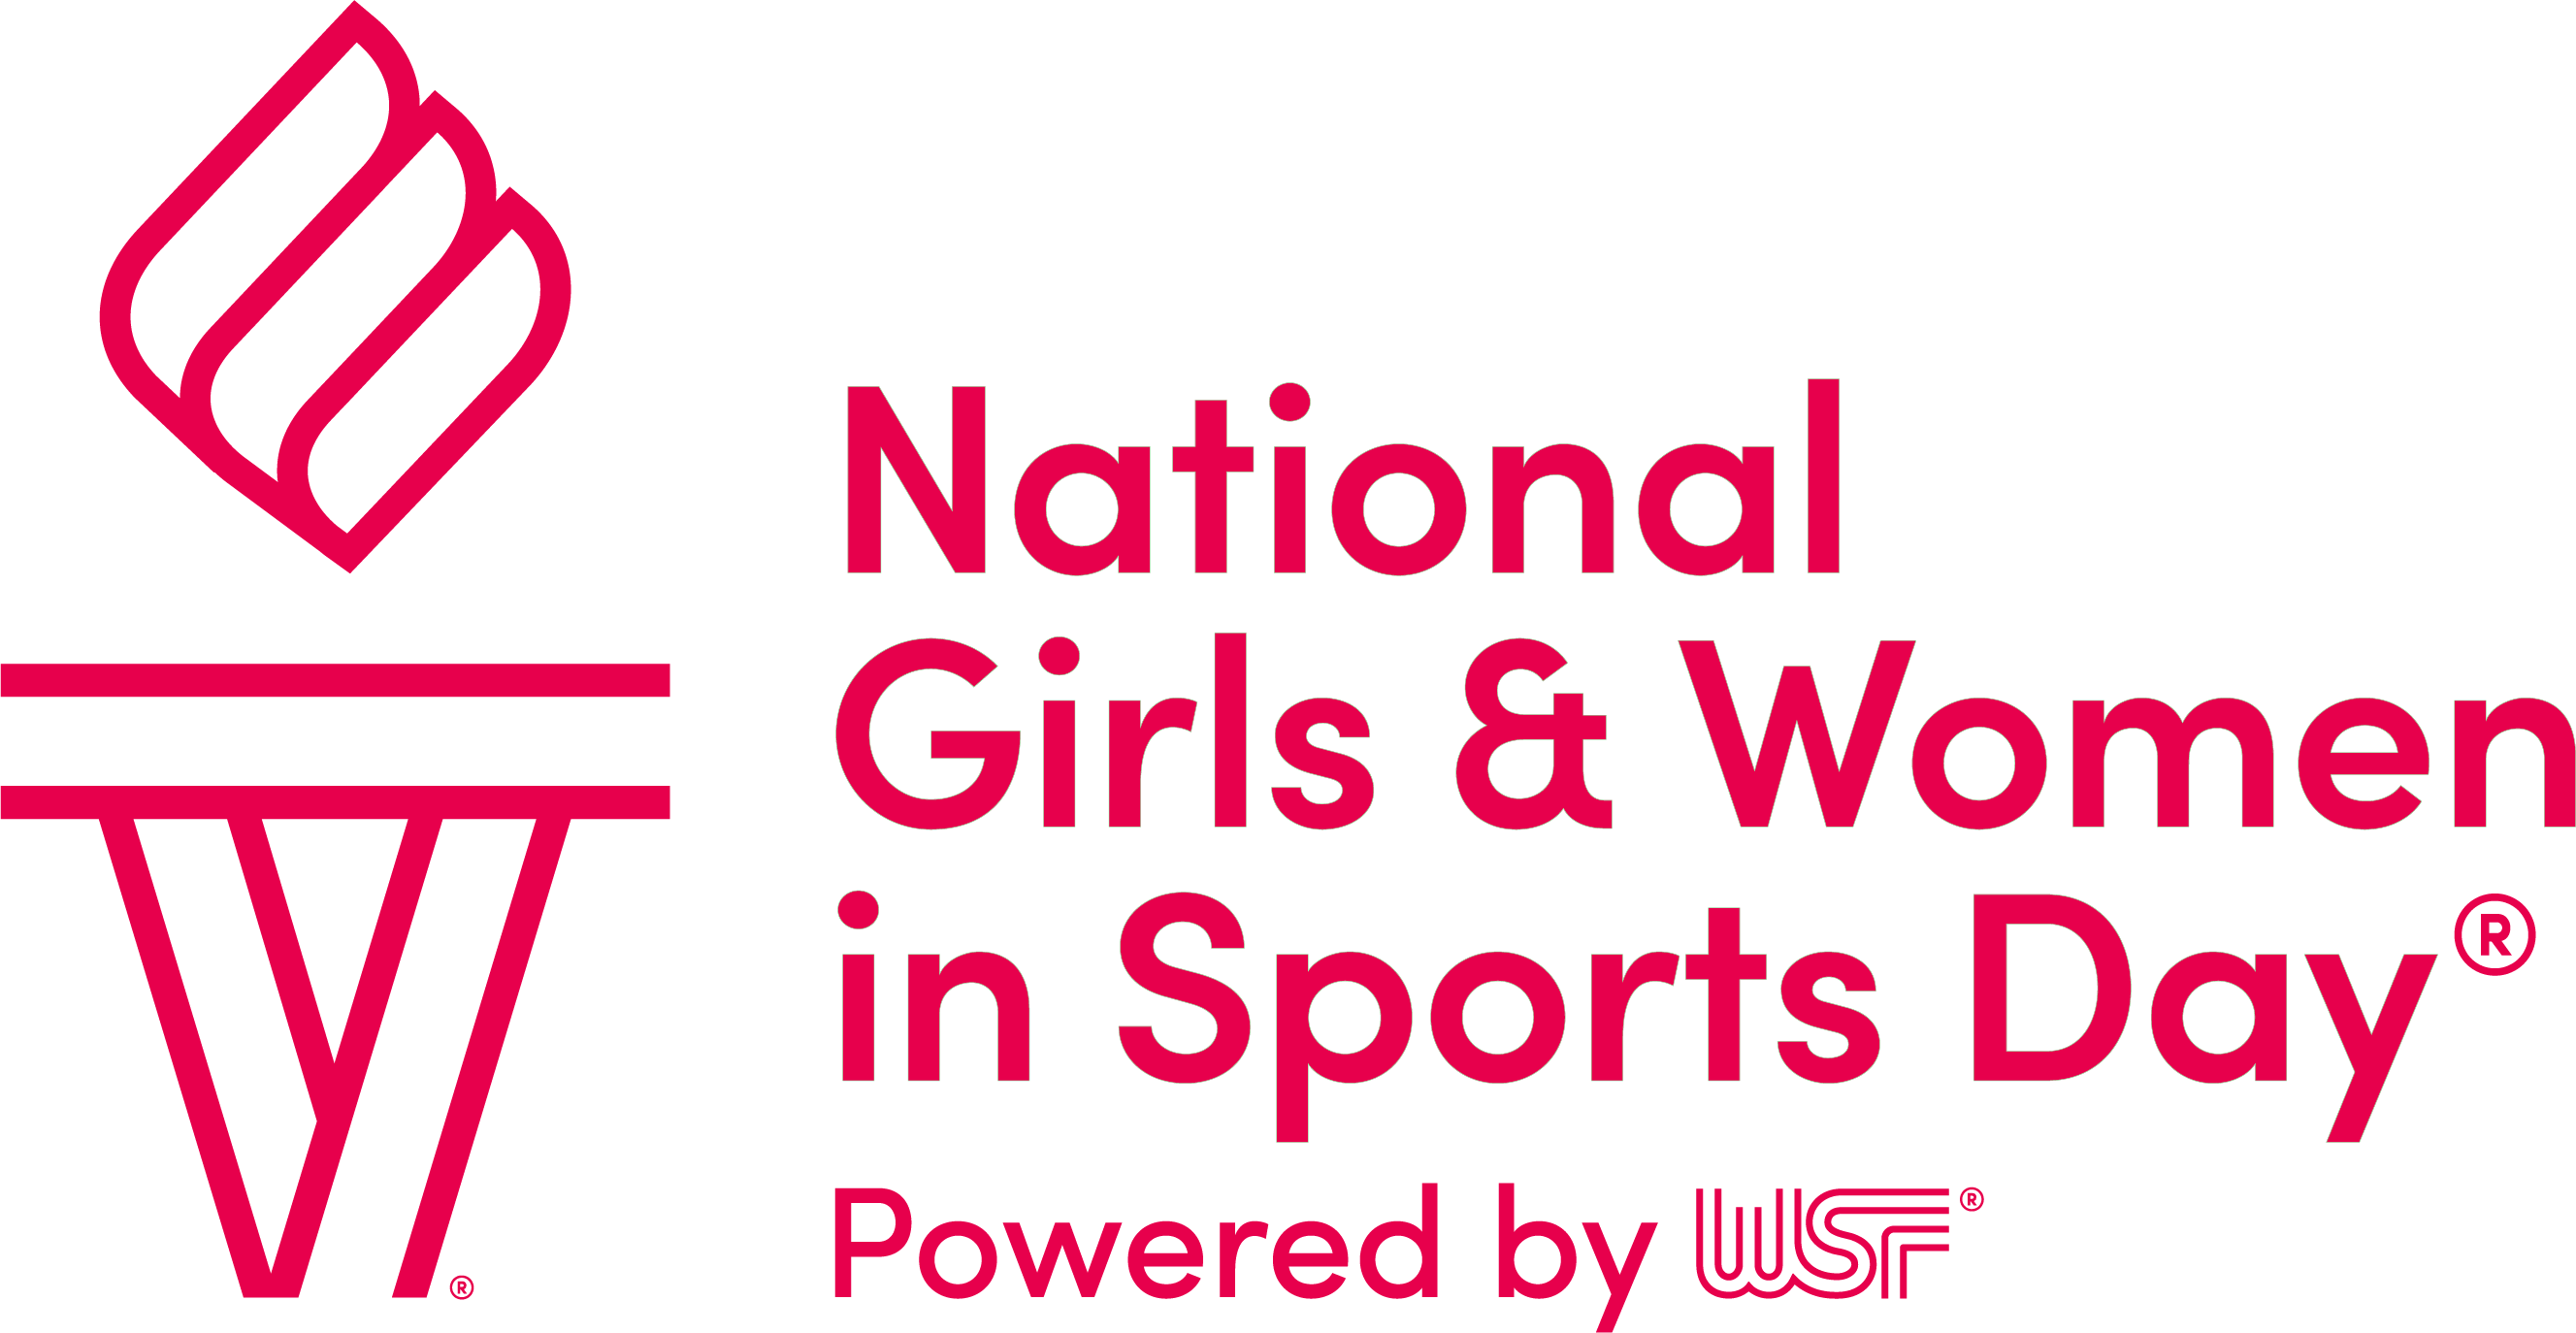 Women Sport International – The global voice of research-based